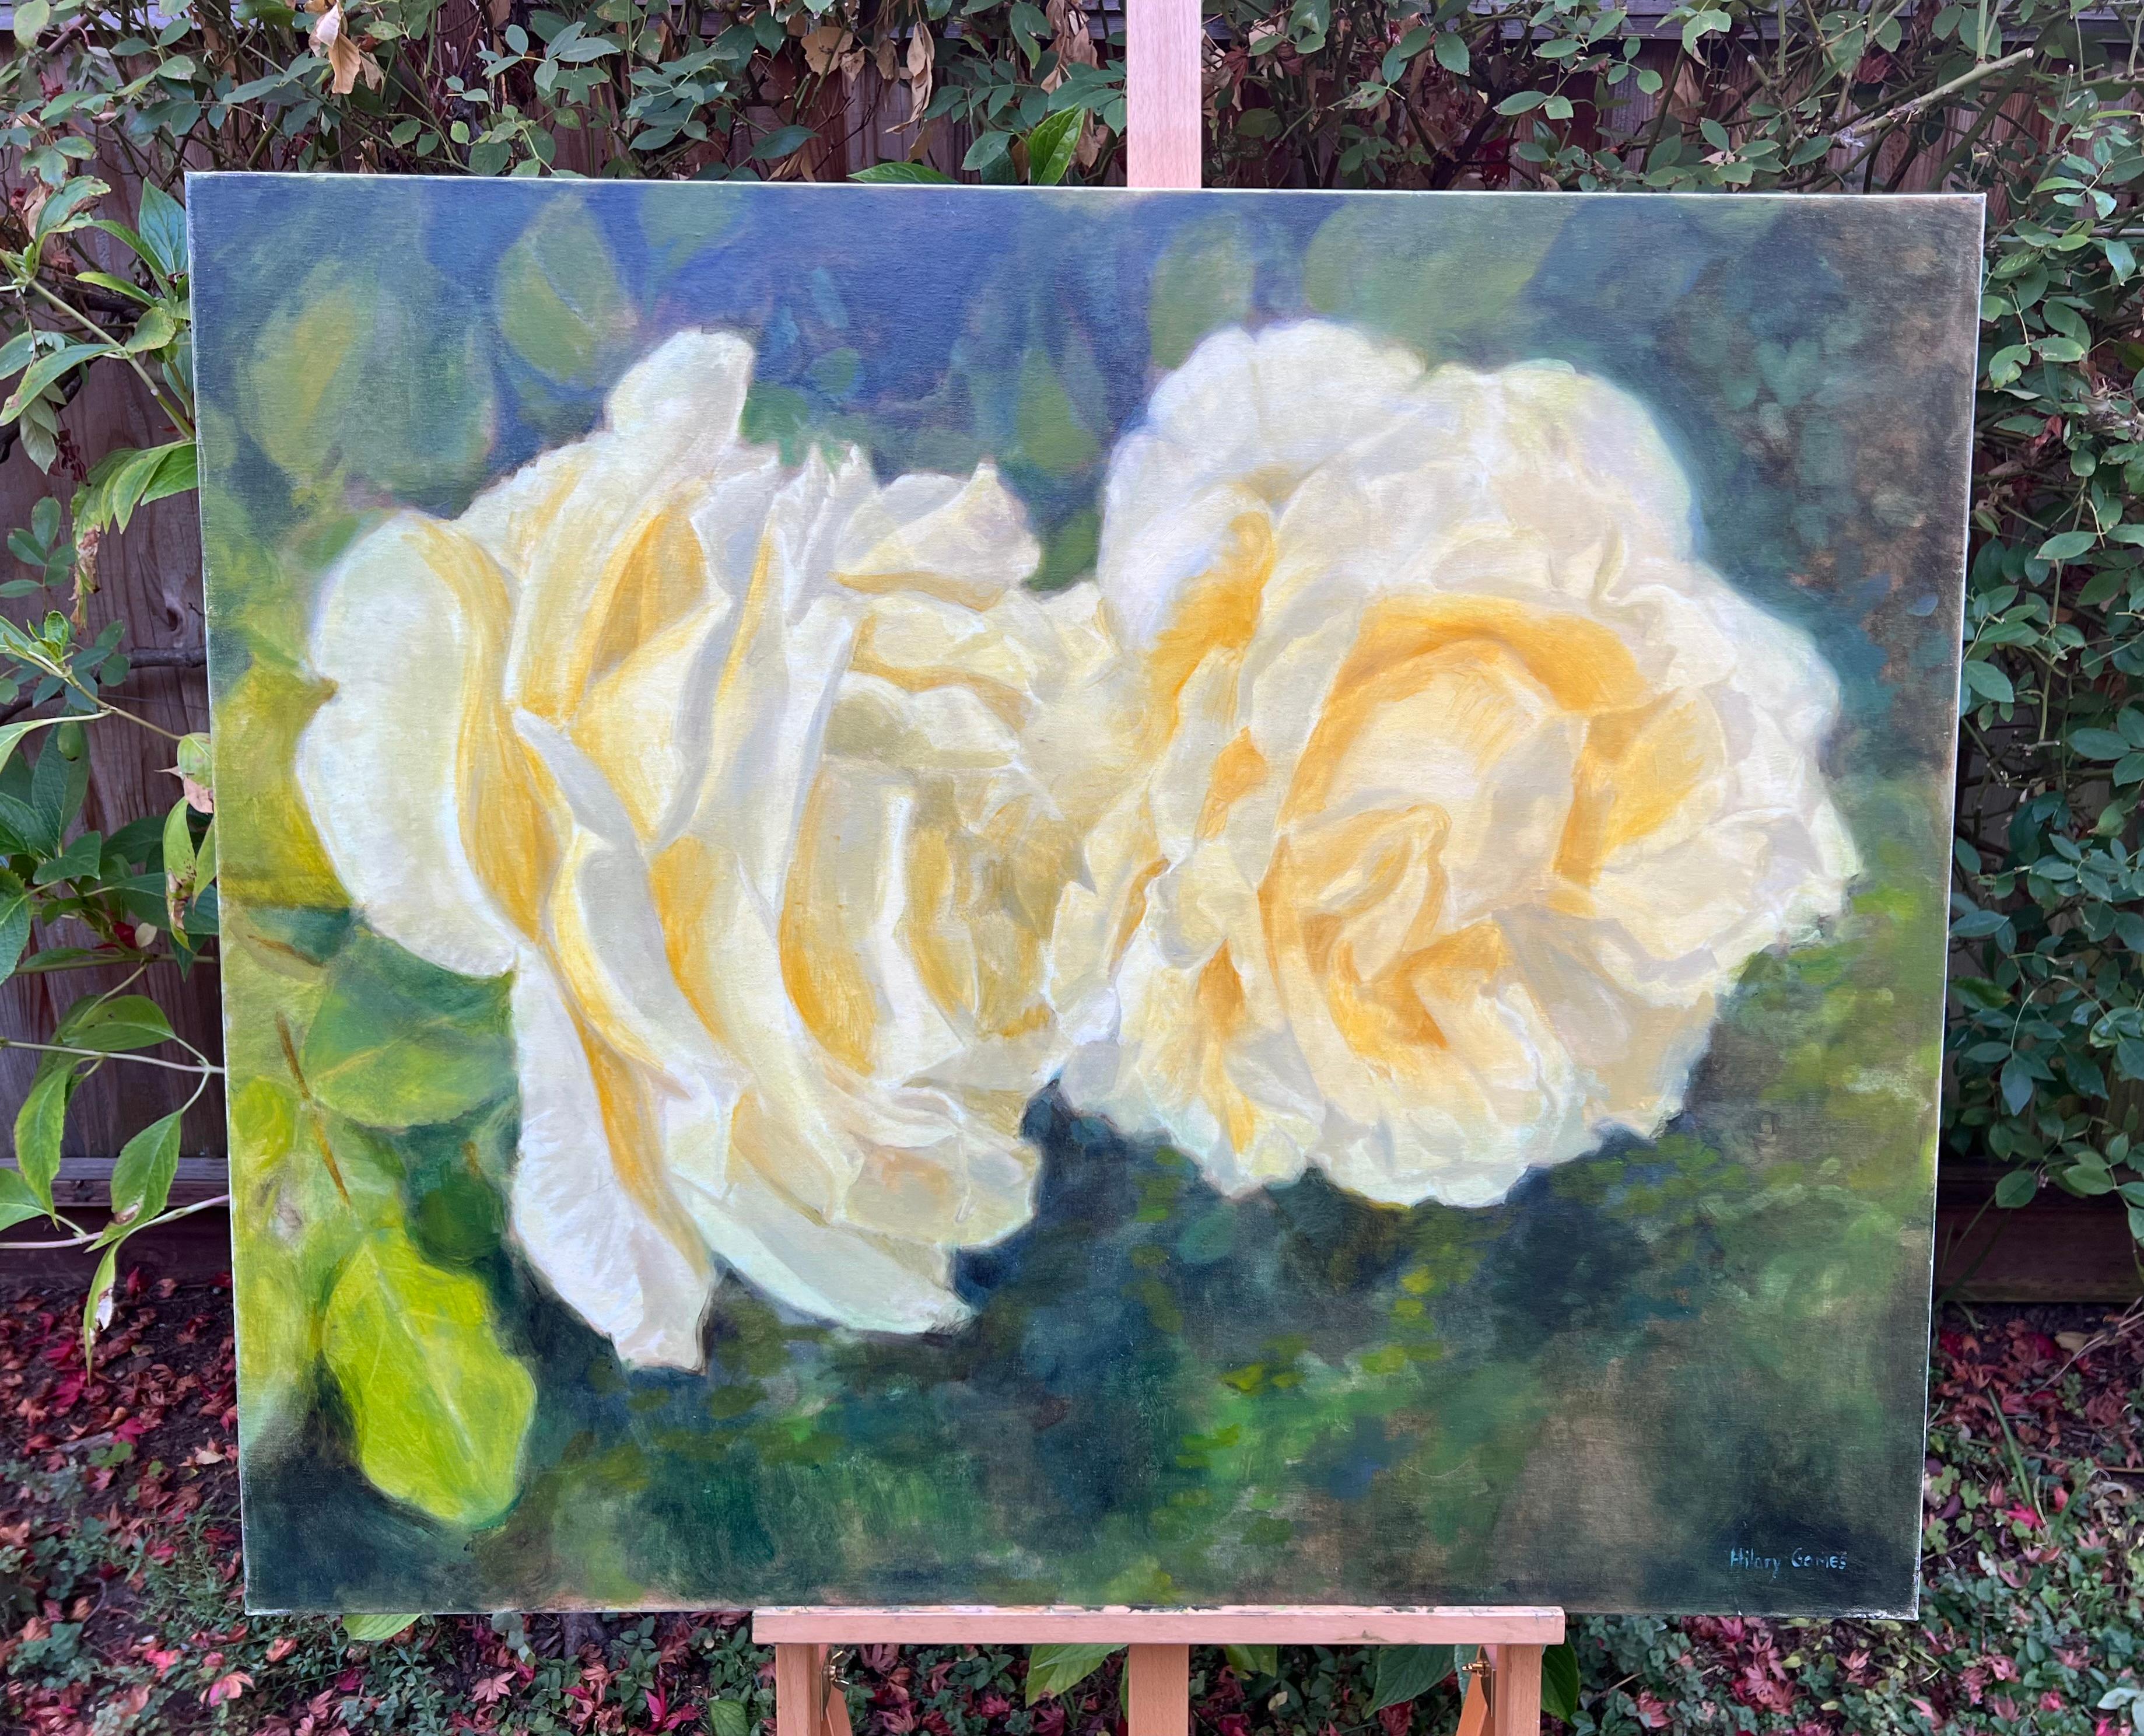 <p>Artist Comments<br>Two roses bloom side by side, seemingly merging. The sun filters through their petals, casting a cream-tinted shadow within the flowers. The soft-edged and brightly colored blossoms add a classical mood to the